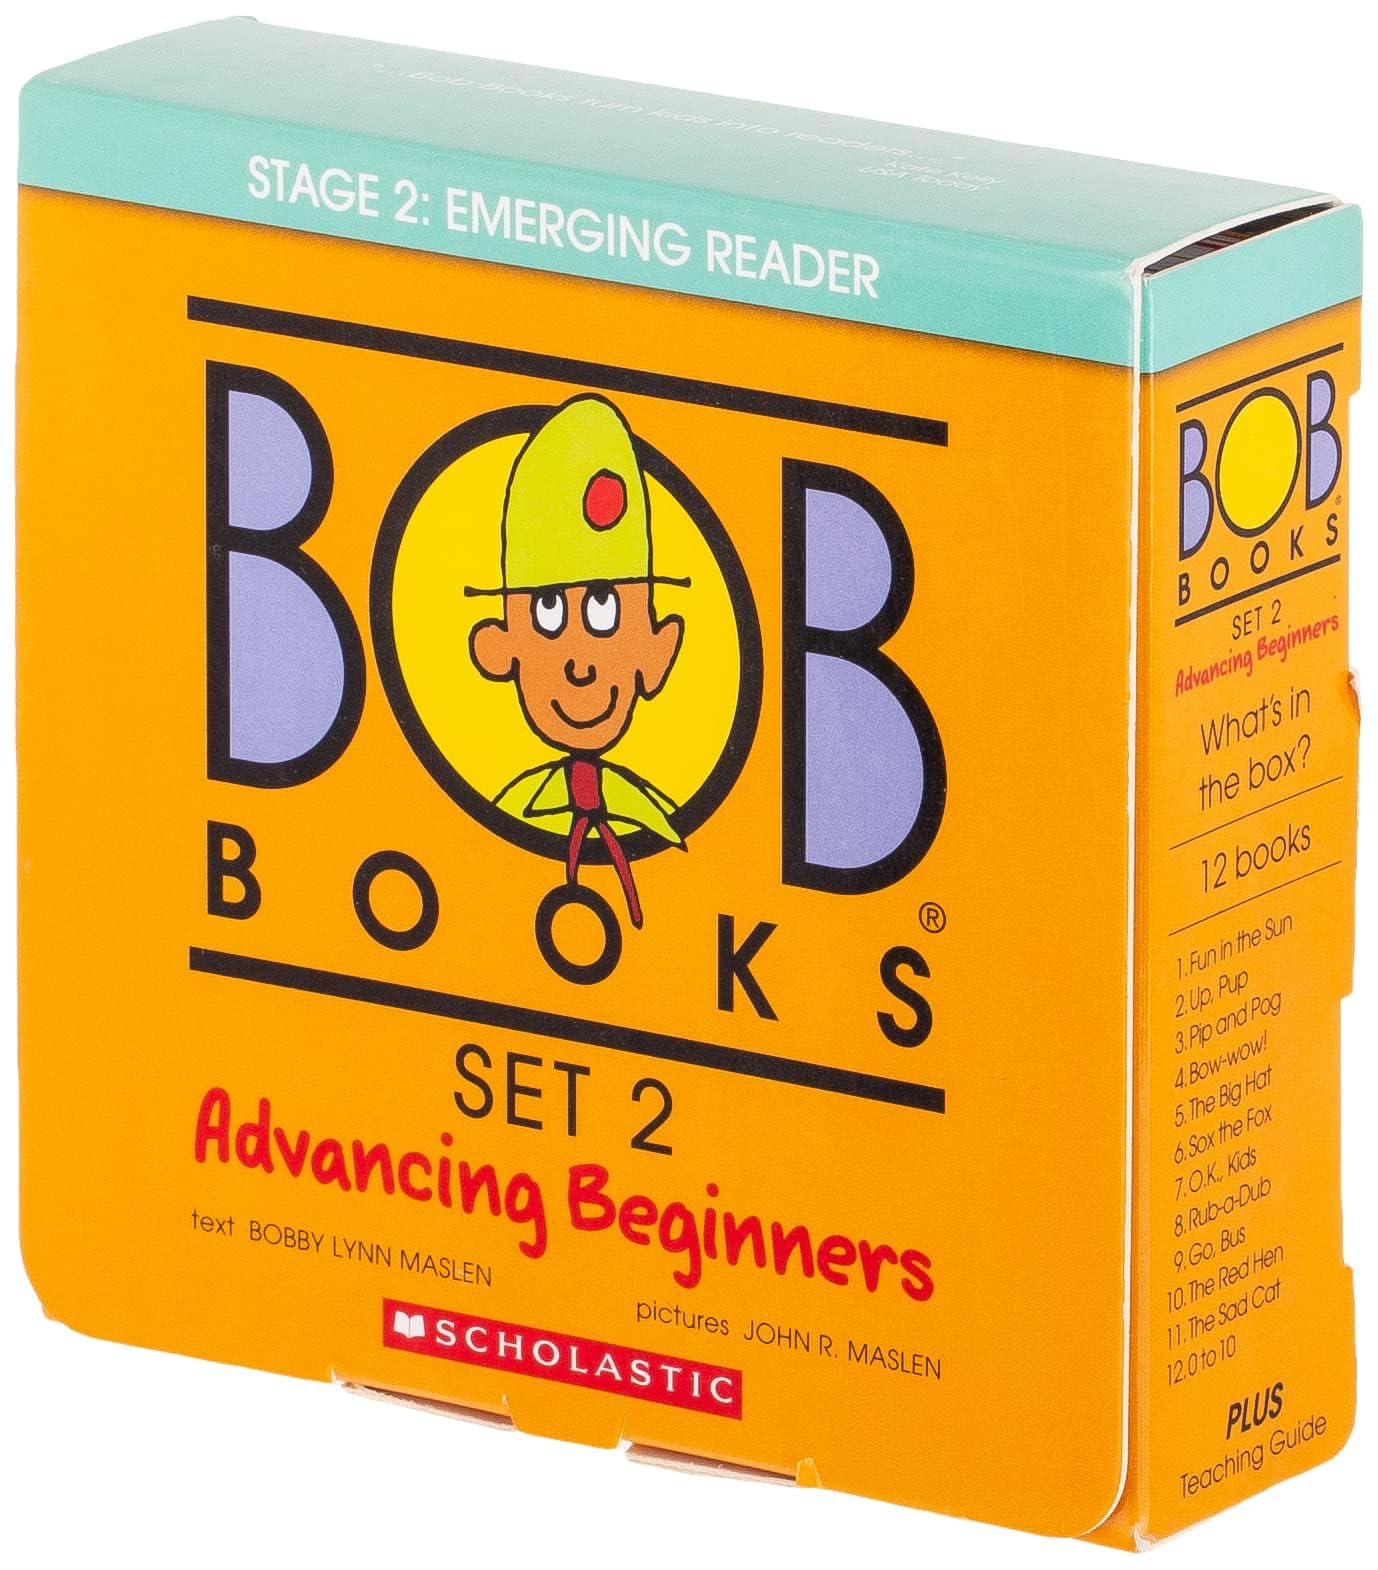 Book Cover Bob Books - Advancing Beginners Box Set Phonics, Ages 4 and Up, Kindergarten (Stage 2: Emerging Reader): 8 Books for Young Readers (Bob Books)